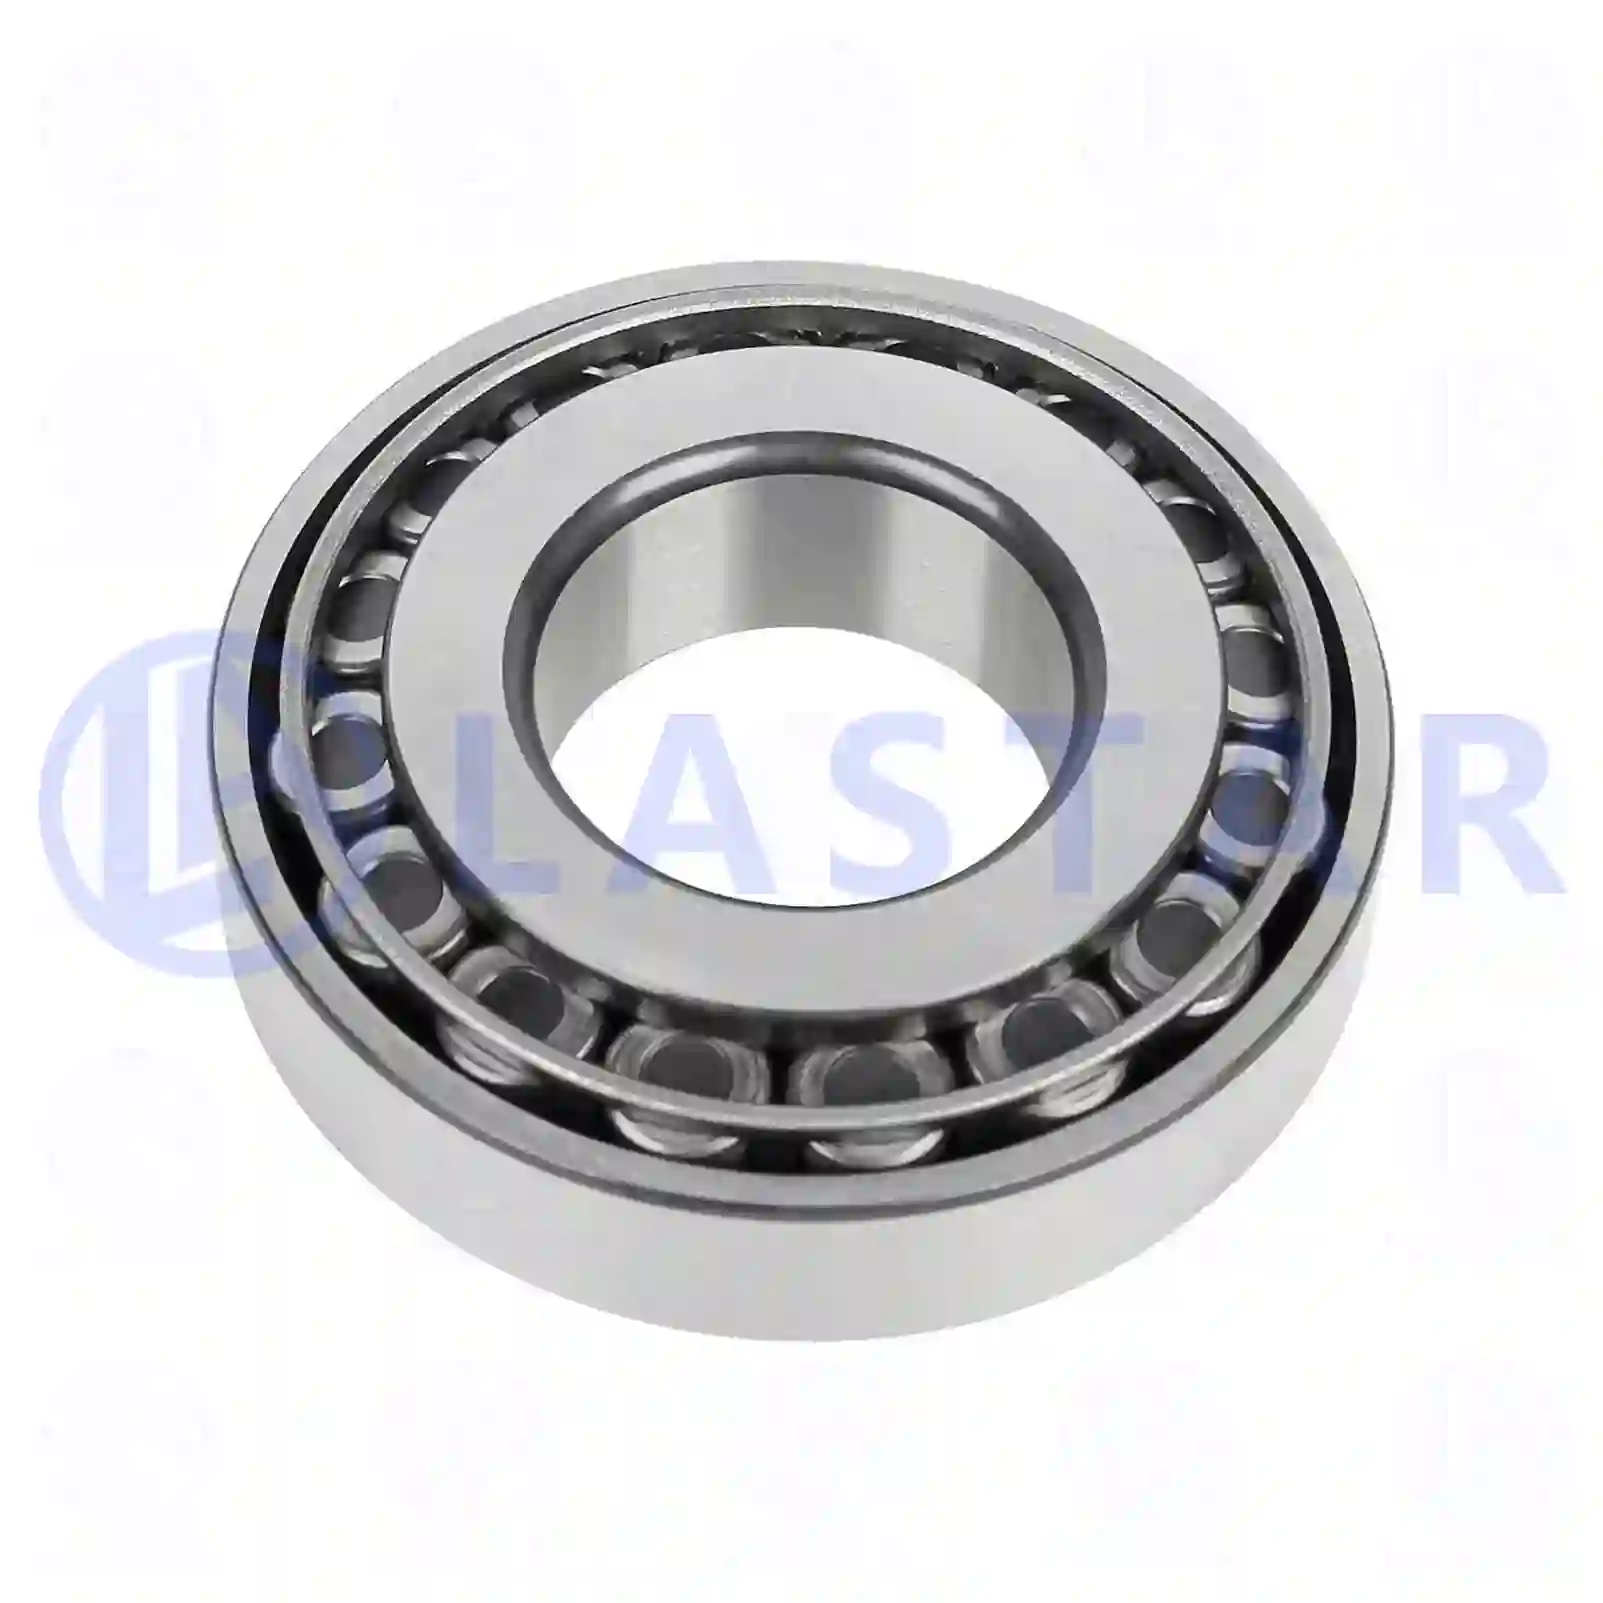 Tapered roller bearing, 77724881, 01109981, 26800370, 94032605, 94034275, 94034276, 988445106, 988445106A, 1-09812026-0, 1-09812027-0, 5-09812063-0, 00819014, 01109981, 01109982, 26800370, 000720030309, 0019813705, 0019814605, 0019815105, 0069814205, 0099810305, 0109815905, 0109816305, 38140-86160, 38324-Z5000, 0773030900, 4200001200, 177802, 26800370 ||  77724881 Lastar Spare Part | Truck Spare Parts, Auotomotive Spare Parts Tapered roller bearing, 77724881, 01109981, 26800370, 94032605, 94034275, 94034276, 988445106, 988445106A, 1-09812026-0, 1-09812027-0, 5-09812063-0, 00819014, 01109981, 01109982, 26800370, 000720030309, 0019813705, 0019814605, 0019815105, 0069814205, 0099810305, 0109815905, 0109816305, 38140-86160, 38324-Z5000, 0773030900, 4200001200, 177802, 26800370 ||  77724881 Lastar Spare Part | Truck Spare Parts, Auotomotive Spare Parts